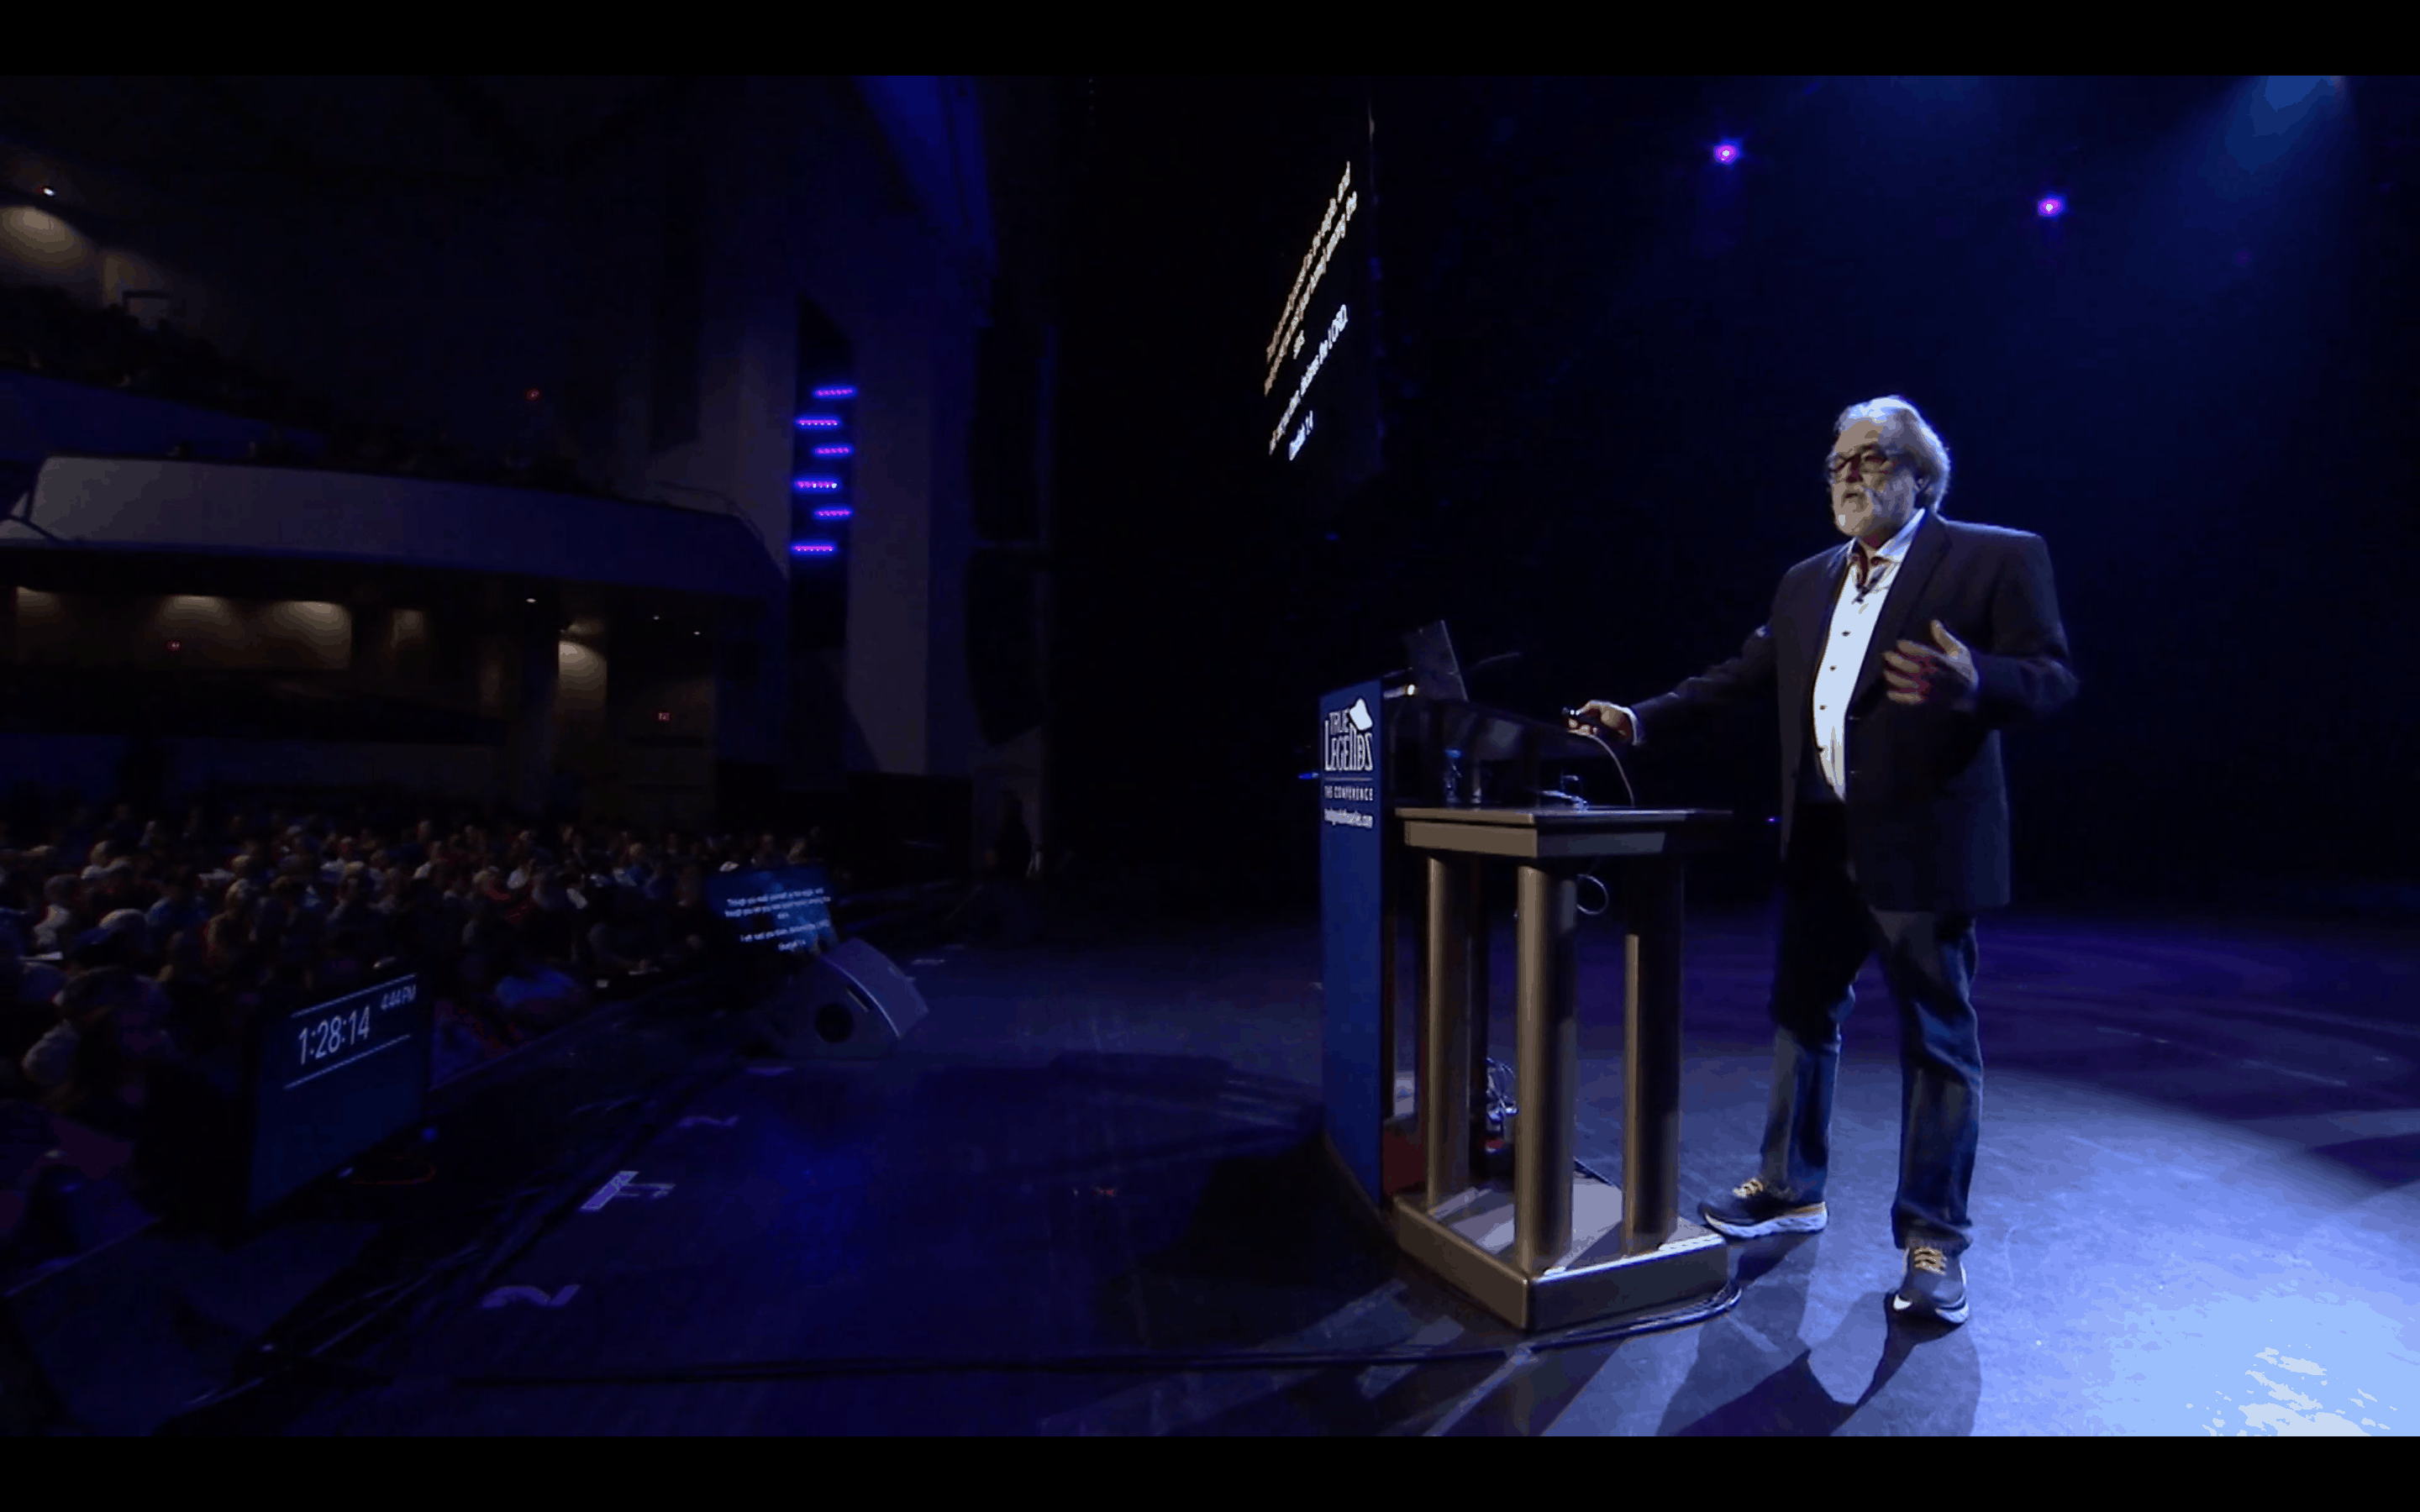 Steve Quayle Presenting at The True Legends Conference